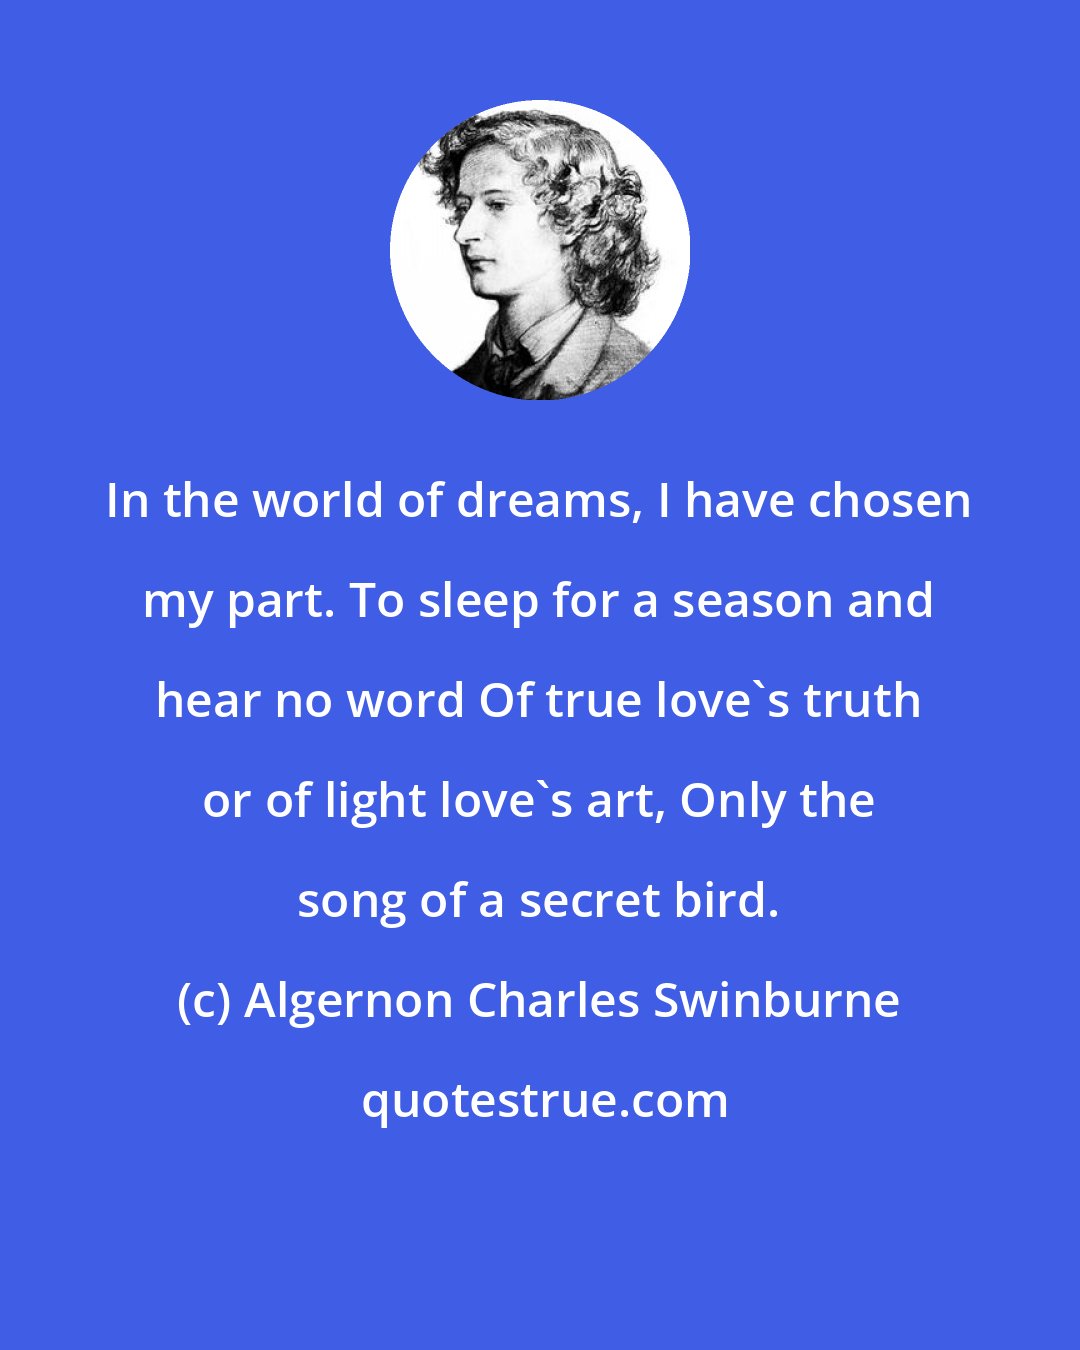 Algernon Charles Swinburne: In the world of dreams, I have chosen my part. To sleep for a season and hear no word Of true love's truth or of light love's art, Only the song of a secret bird.